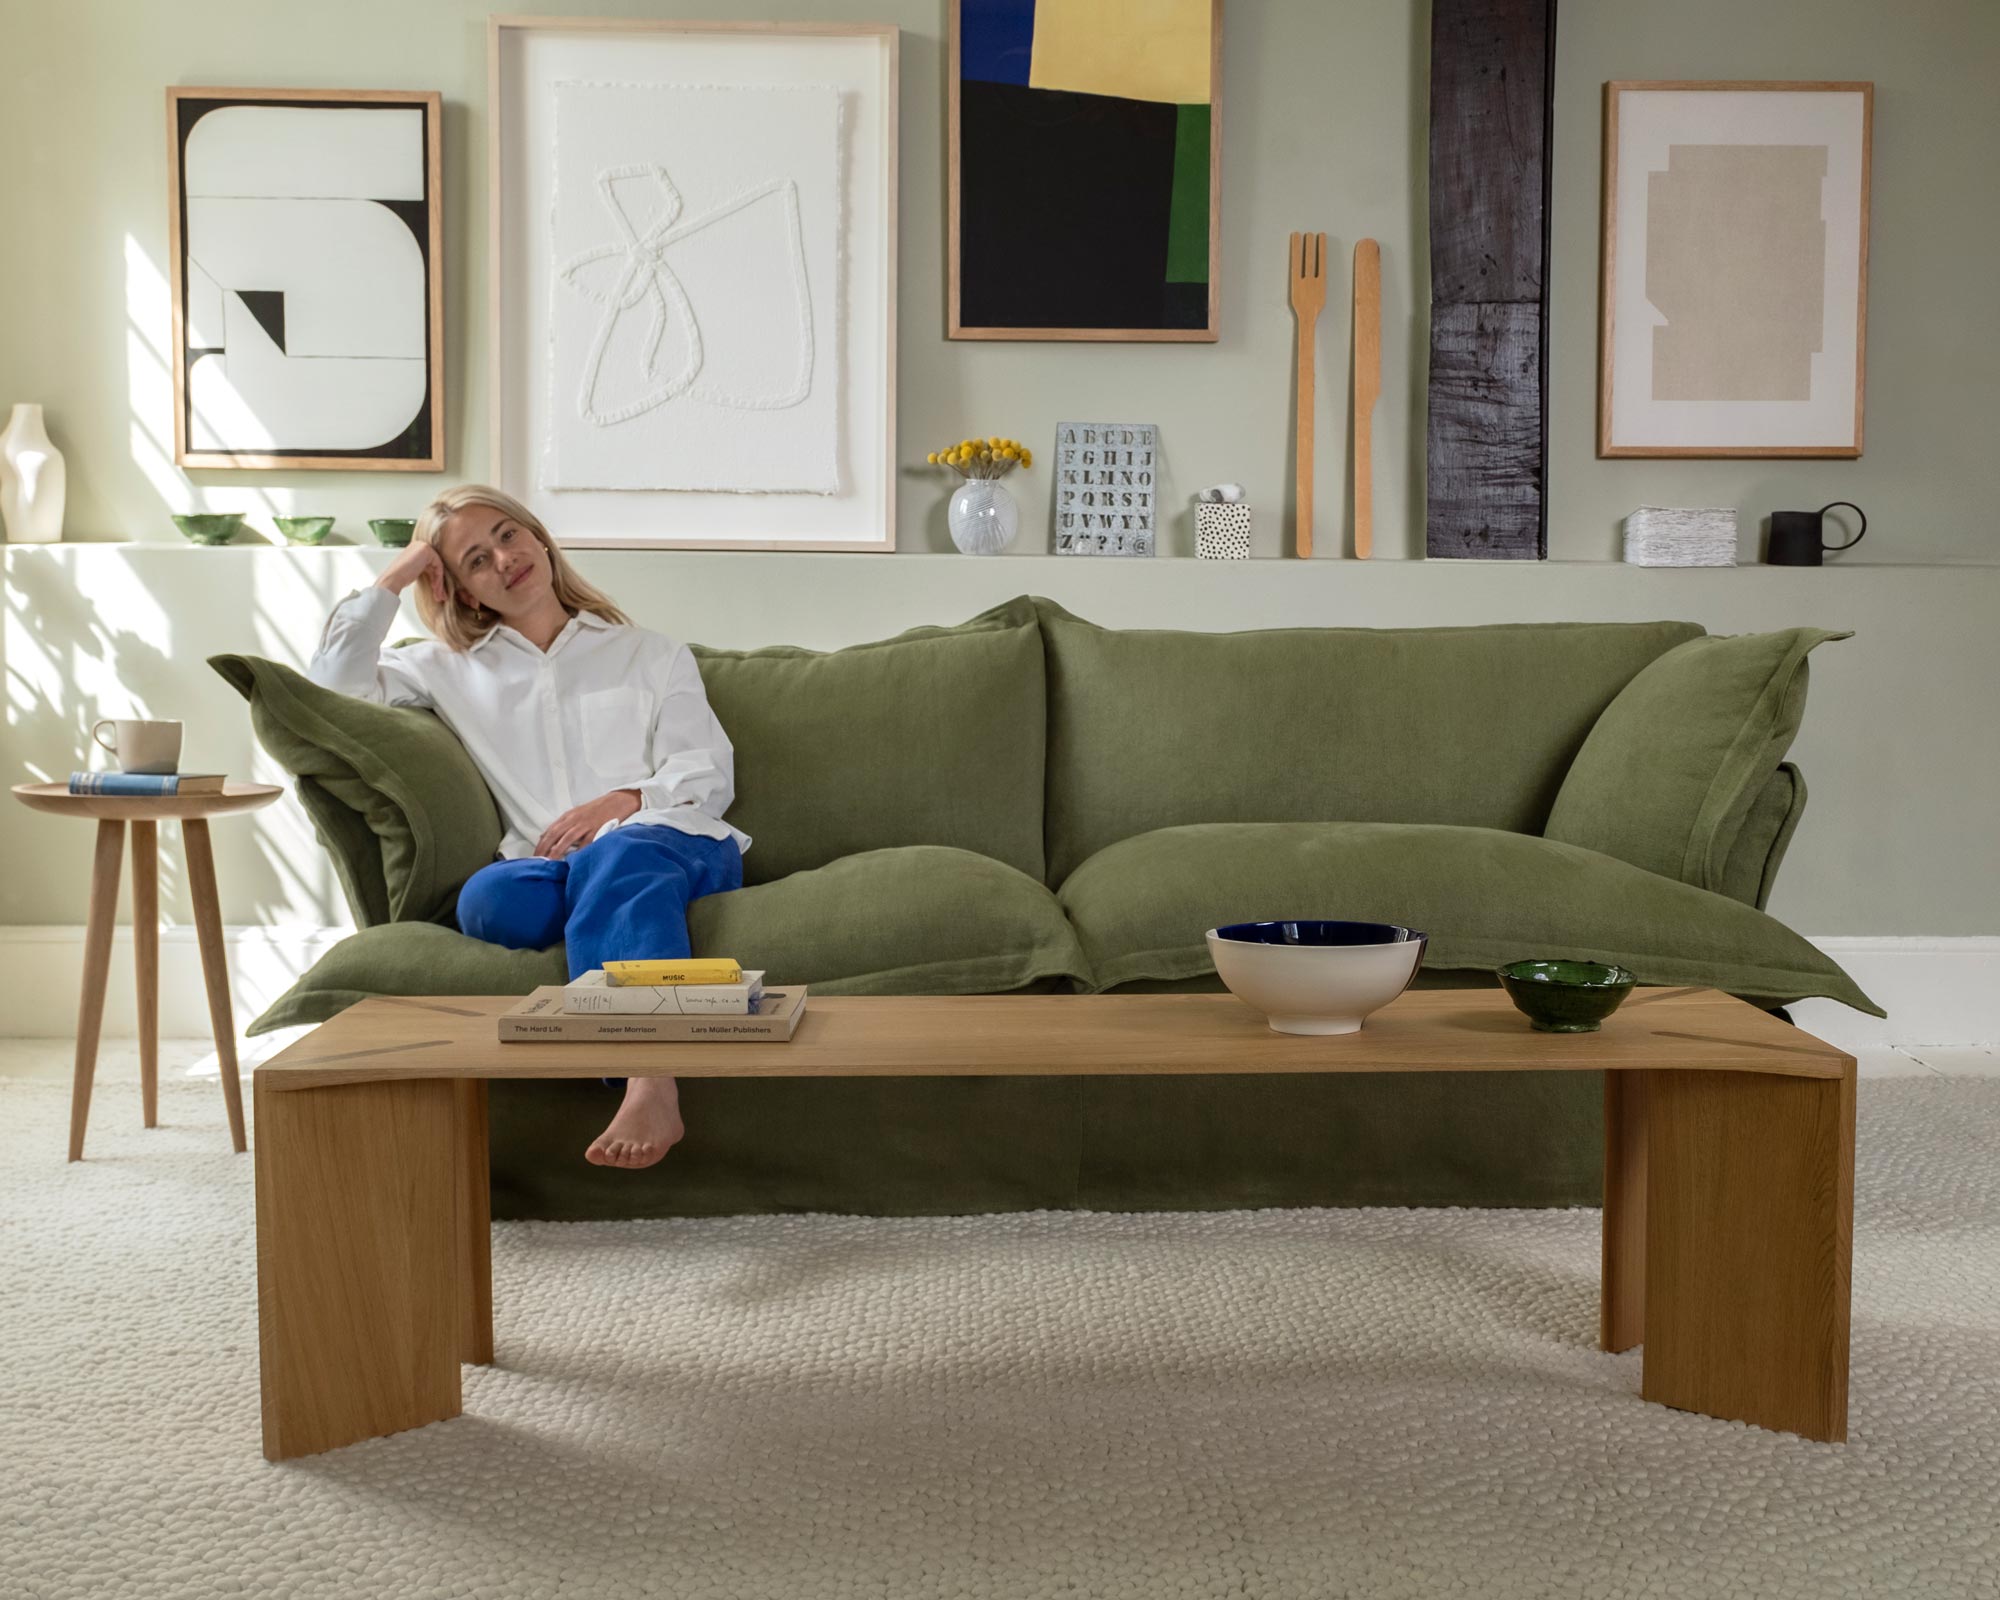 Marnie sitting on the left hand side of a malachite green sofa In front of her is a Dove coffee table styled with a large bowl and books